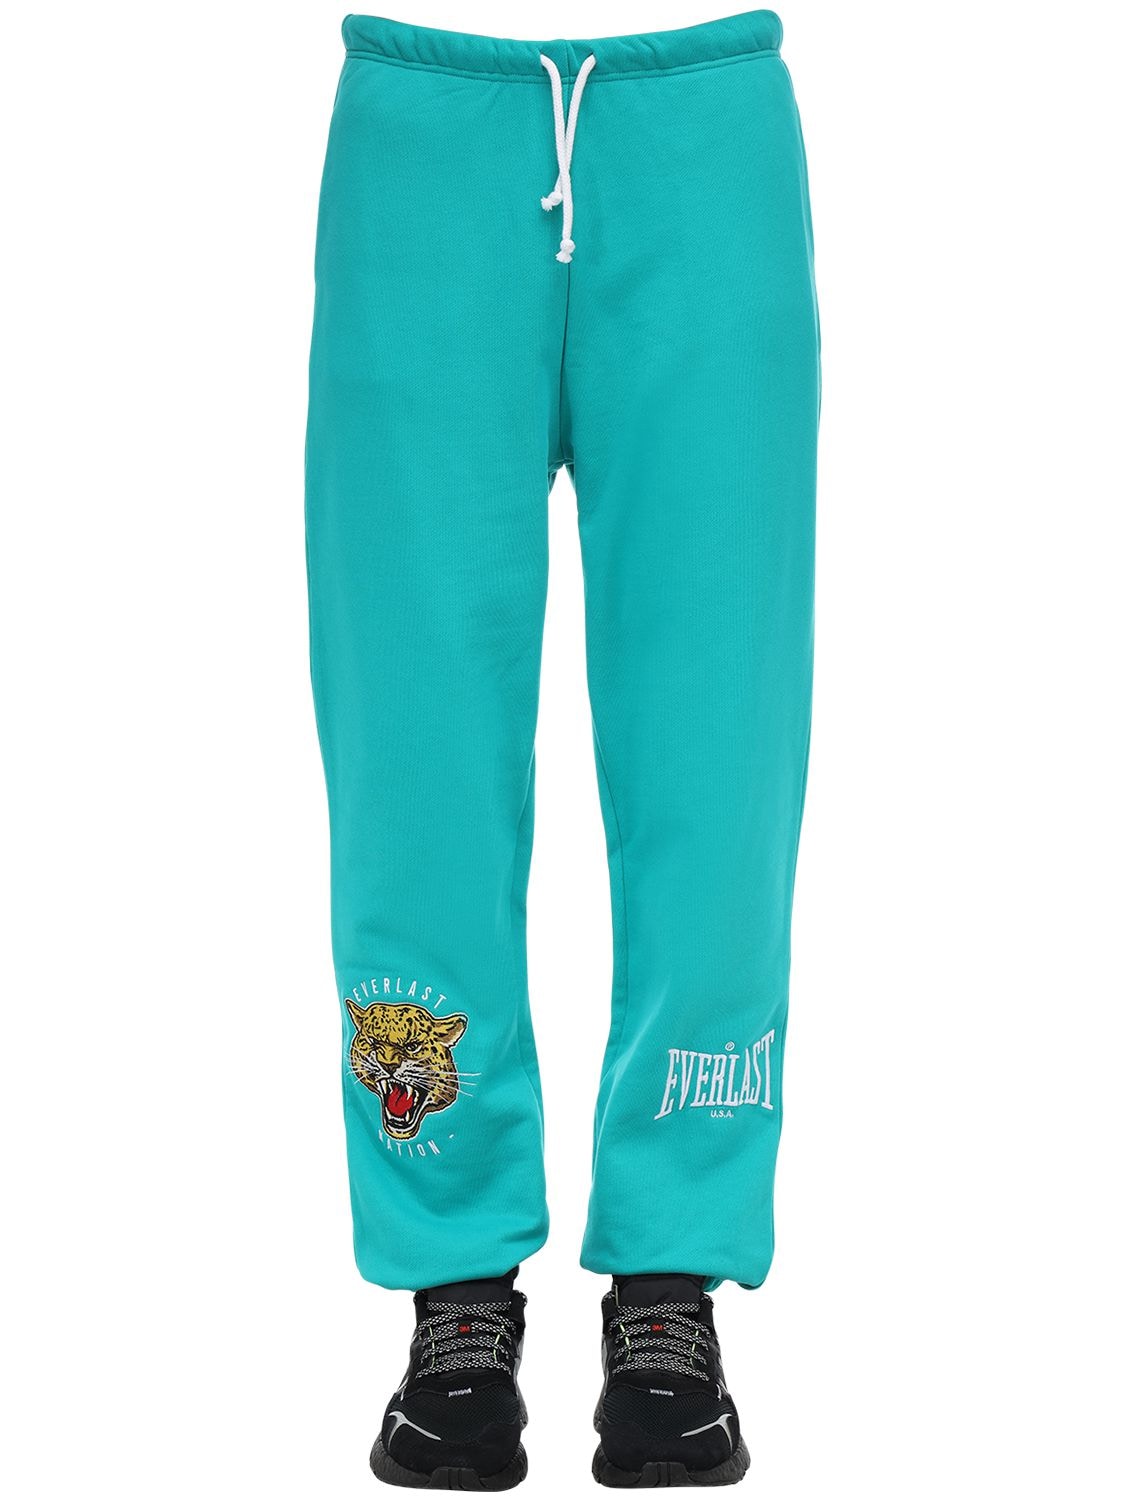 Everlast T.e.n. Cotton Sweatpants W/ Patches In Blue,green